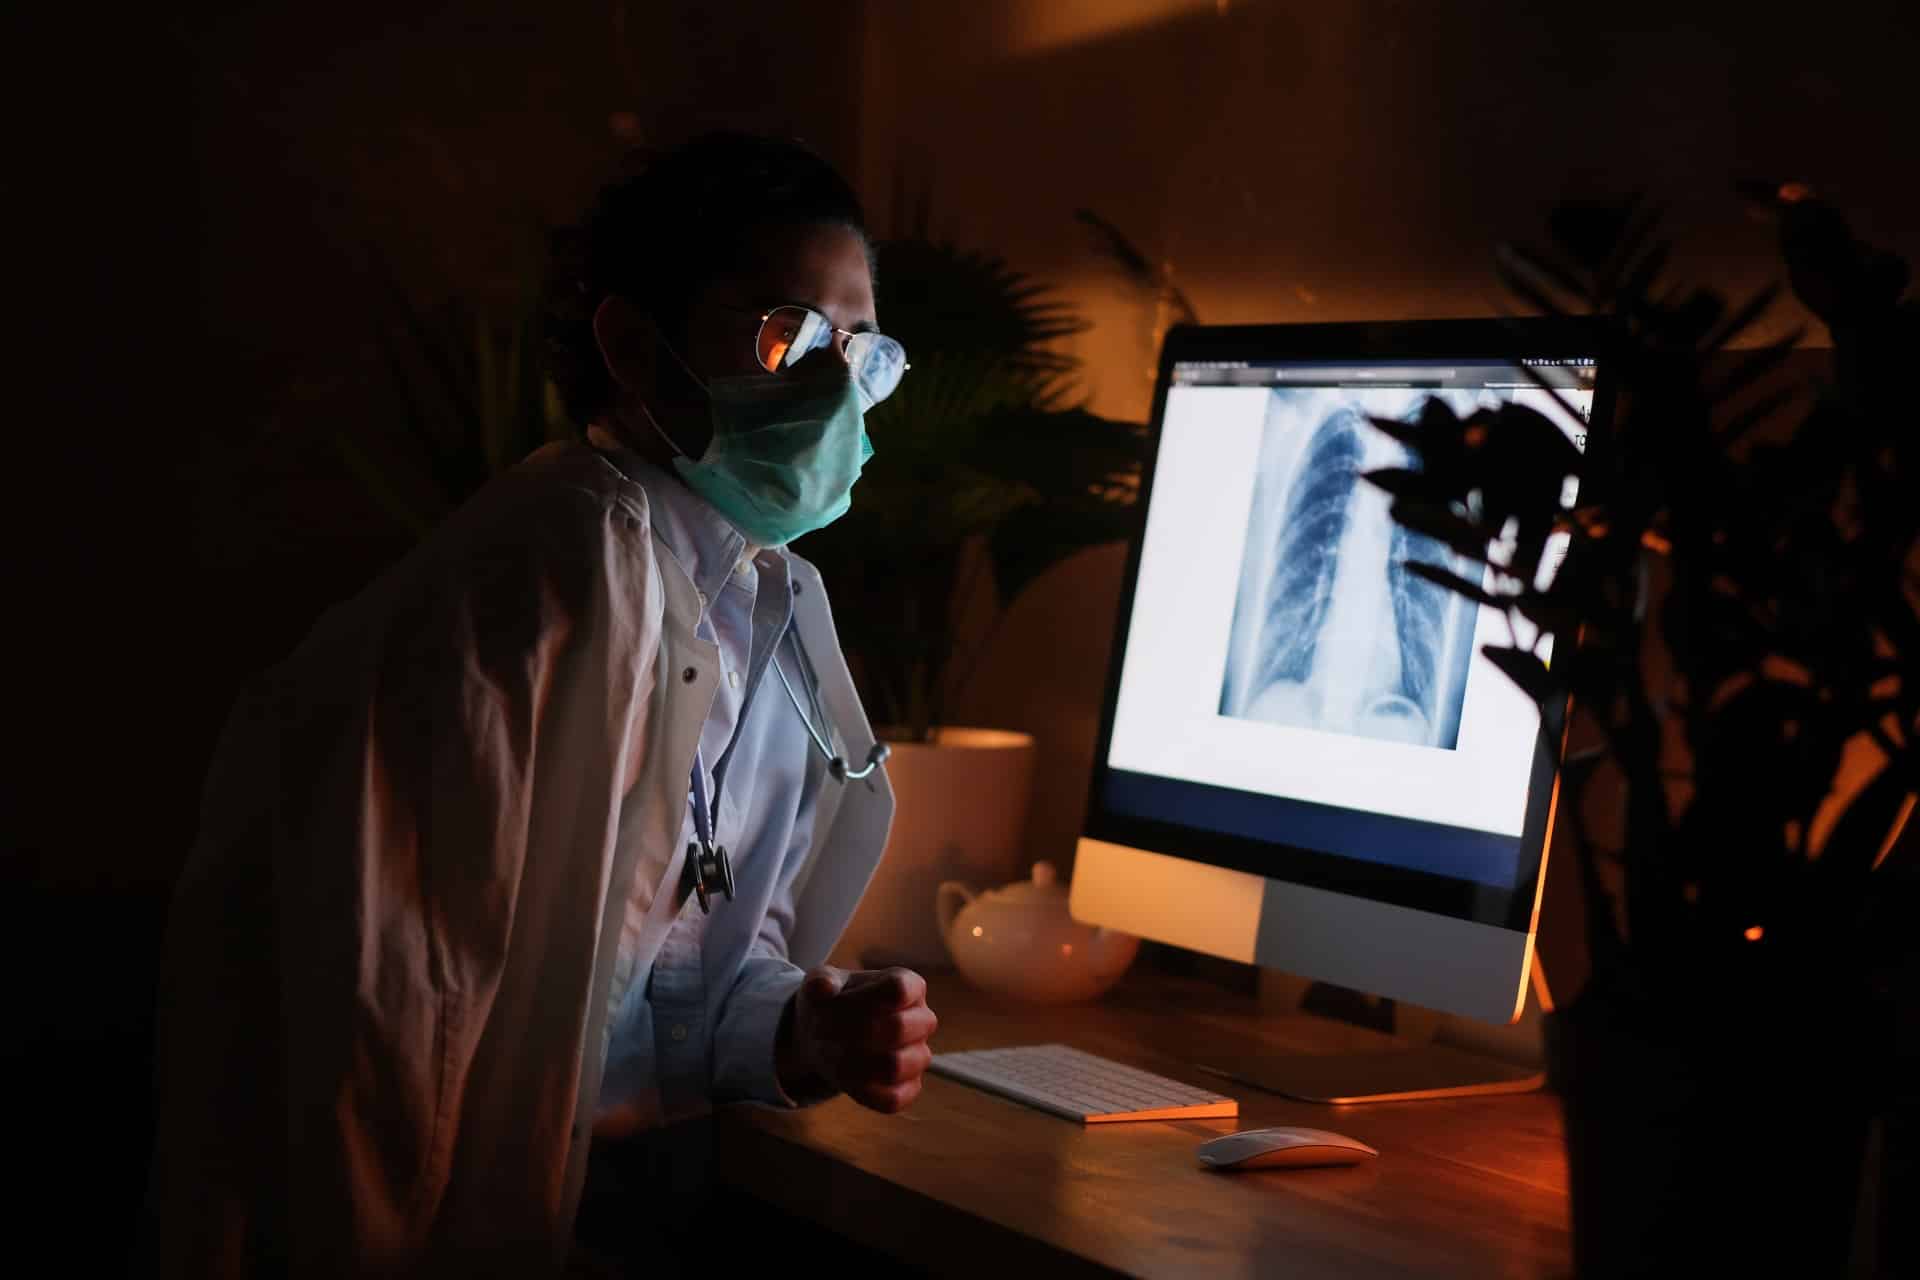 nurse with mask examines x-ray - IT services for healthcare